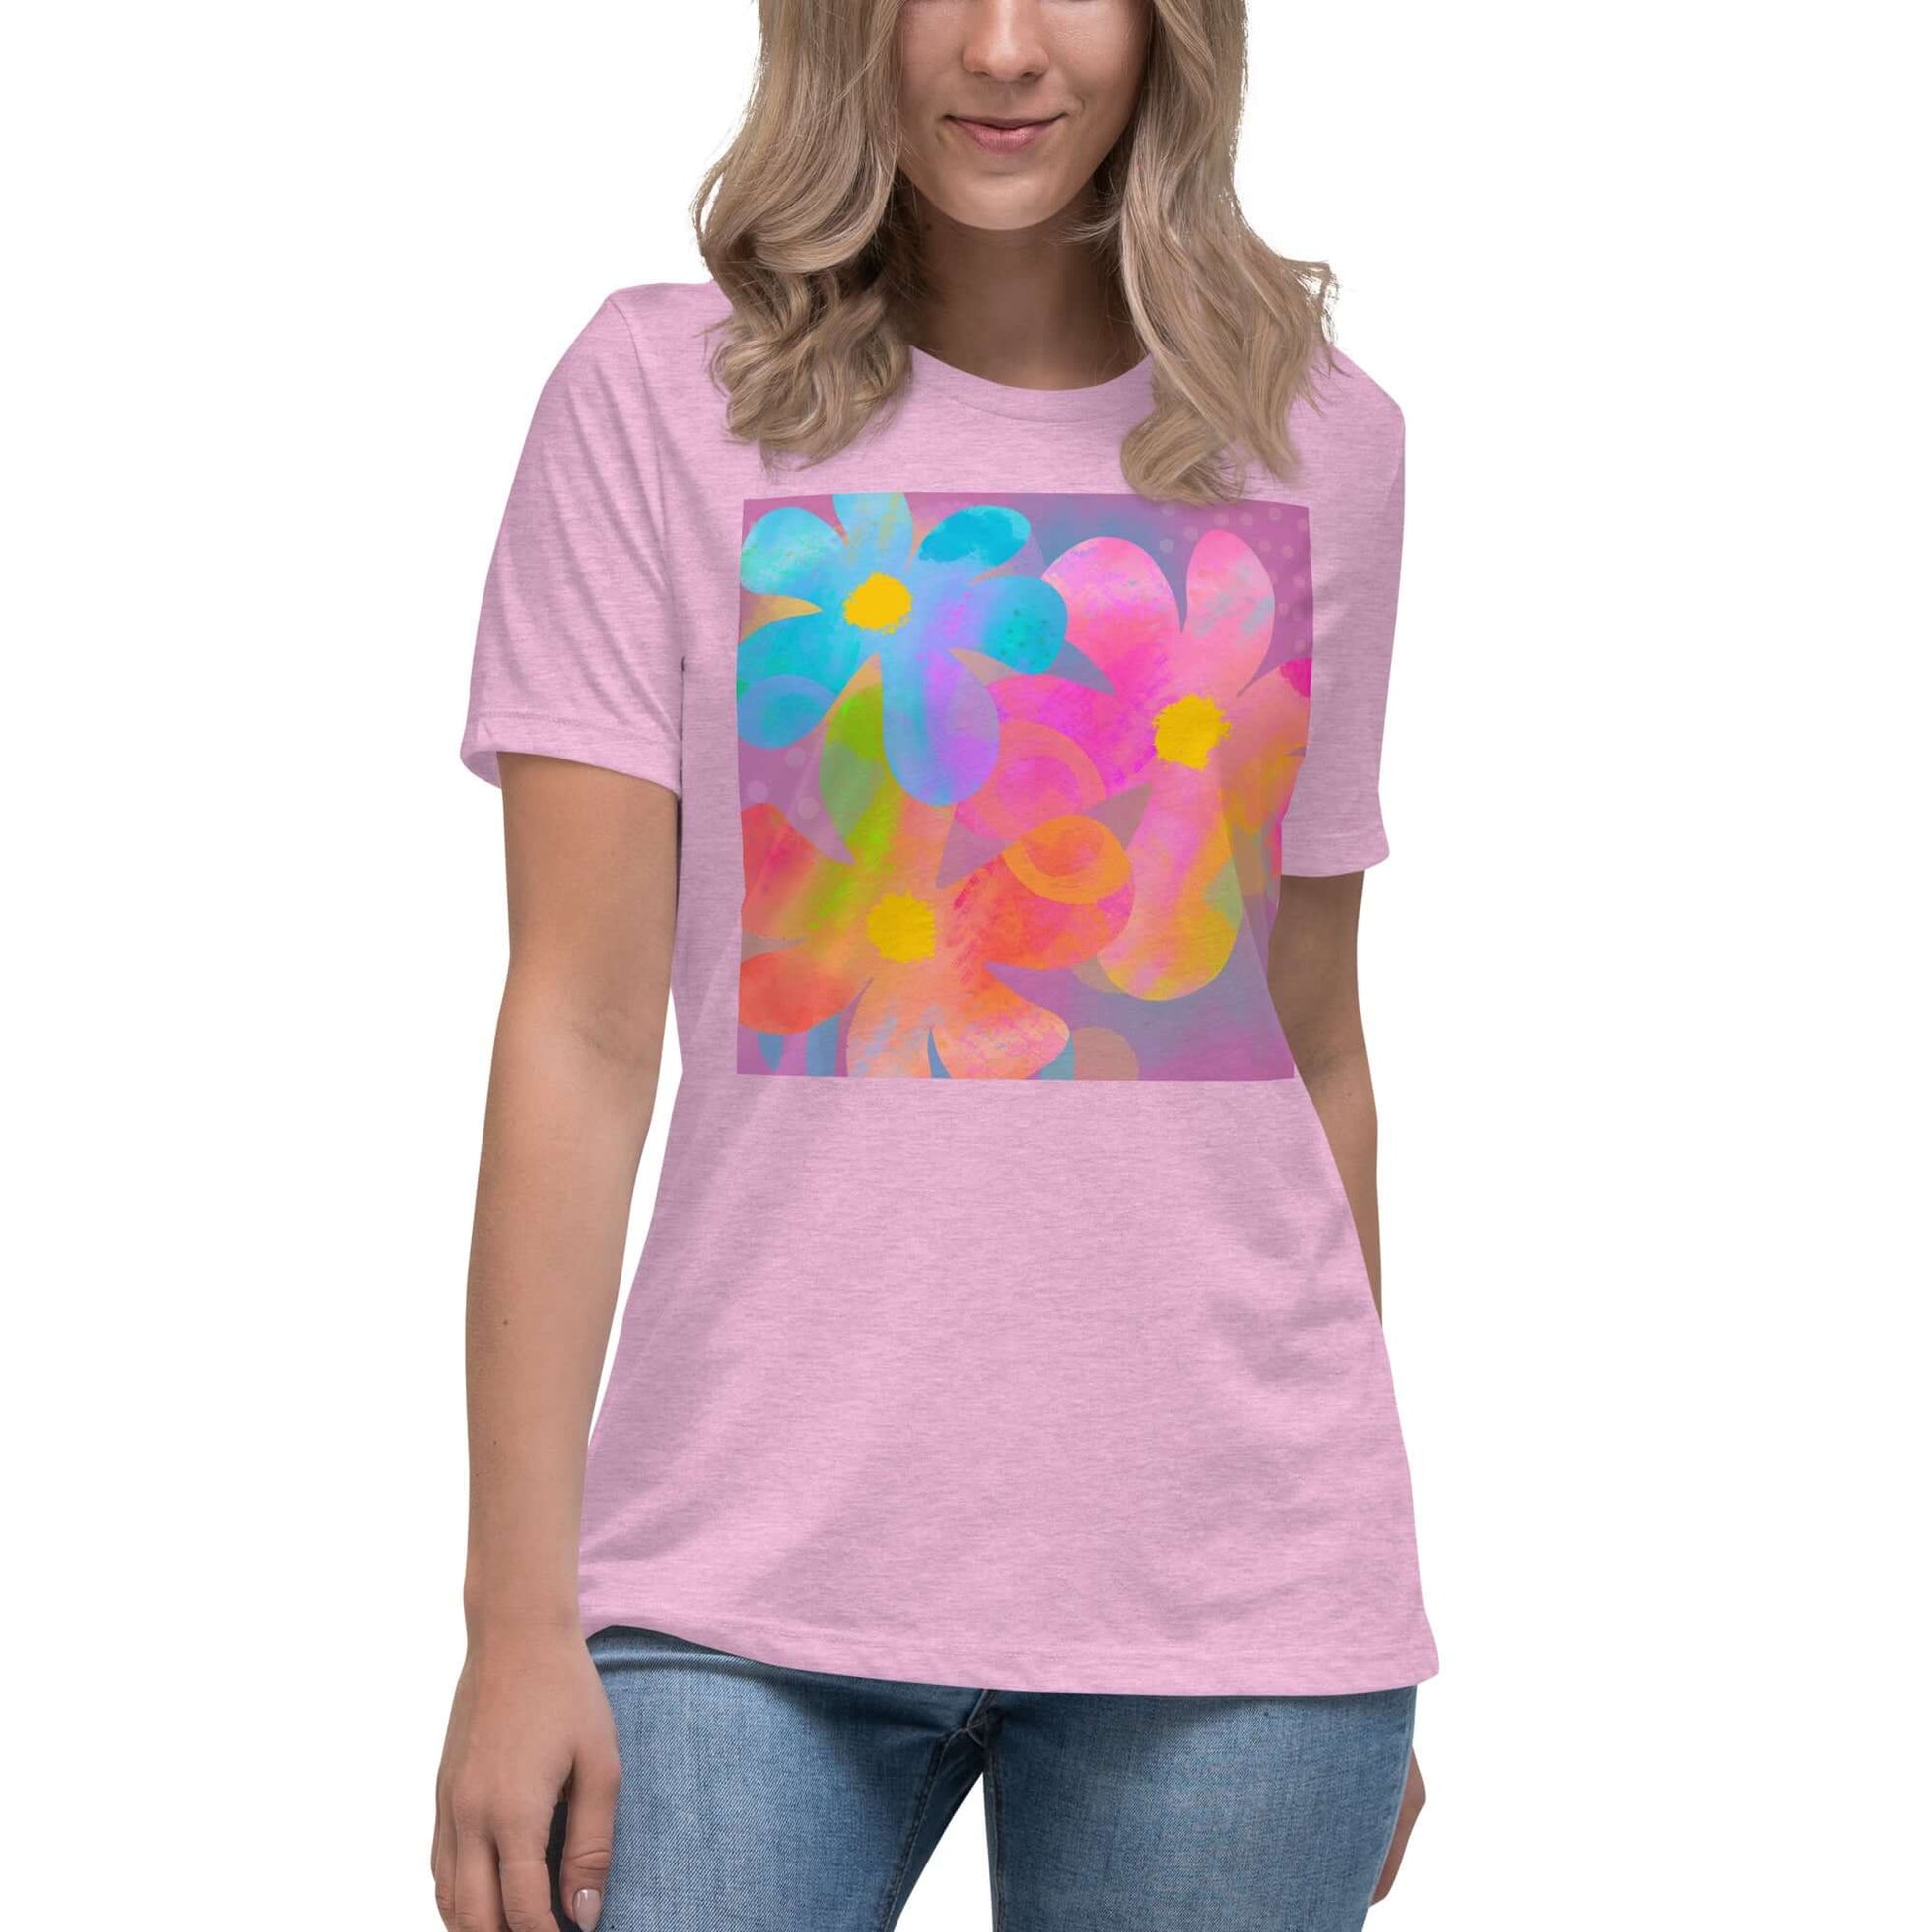 Big Colorful 1960s Psychedelic “Hippie Flowers” Women’s Short Sleeve Tee in Heather Prism Lilac